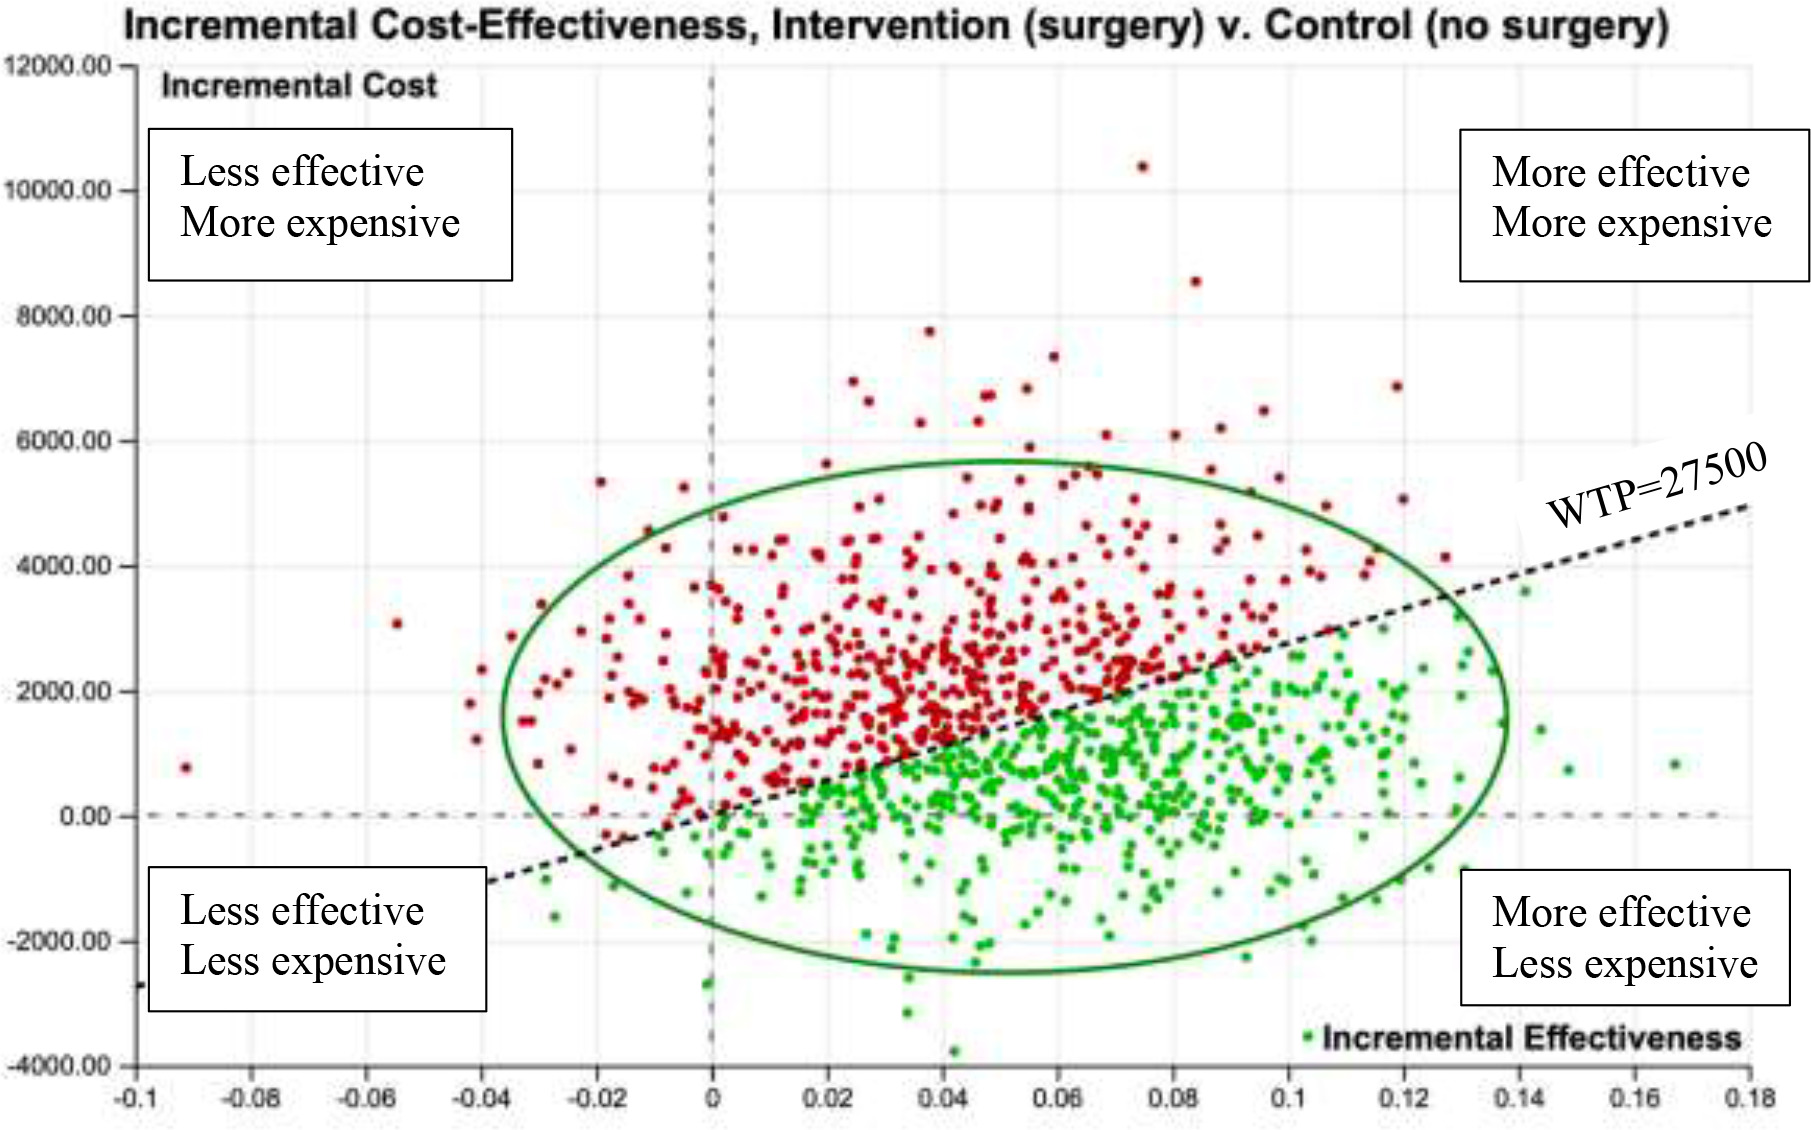 Fig. 2 
            The cost-effectiveness scatterplot showing the uncertainty of the incremental cost-effectiveness ratio (ICER) in the base-case analysis. Incremental cost is on the y-axis and incremental effectiveness on the x-axis. Each quadrant represents whether surgery is either more or less effective and more or less costly. The upper right quadrant shows more effective but also more costly treatment, and it is interpreted in relation to willingness to pay (WTP) (€27,500) line: above the line are ICERs that are not cost-effective, while below the line are the ones that are cost-effective. 45% of ICER iterations are above the WTP line, and are hence considered not cost-effective. The rest are inferior or under the WTP threshold.
          